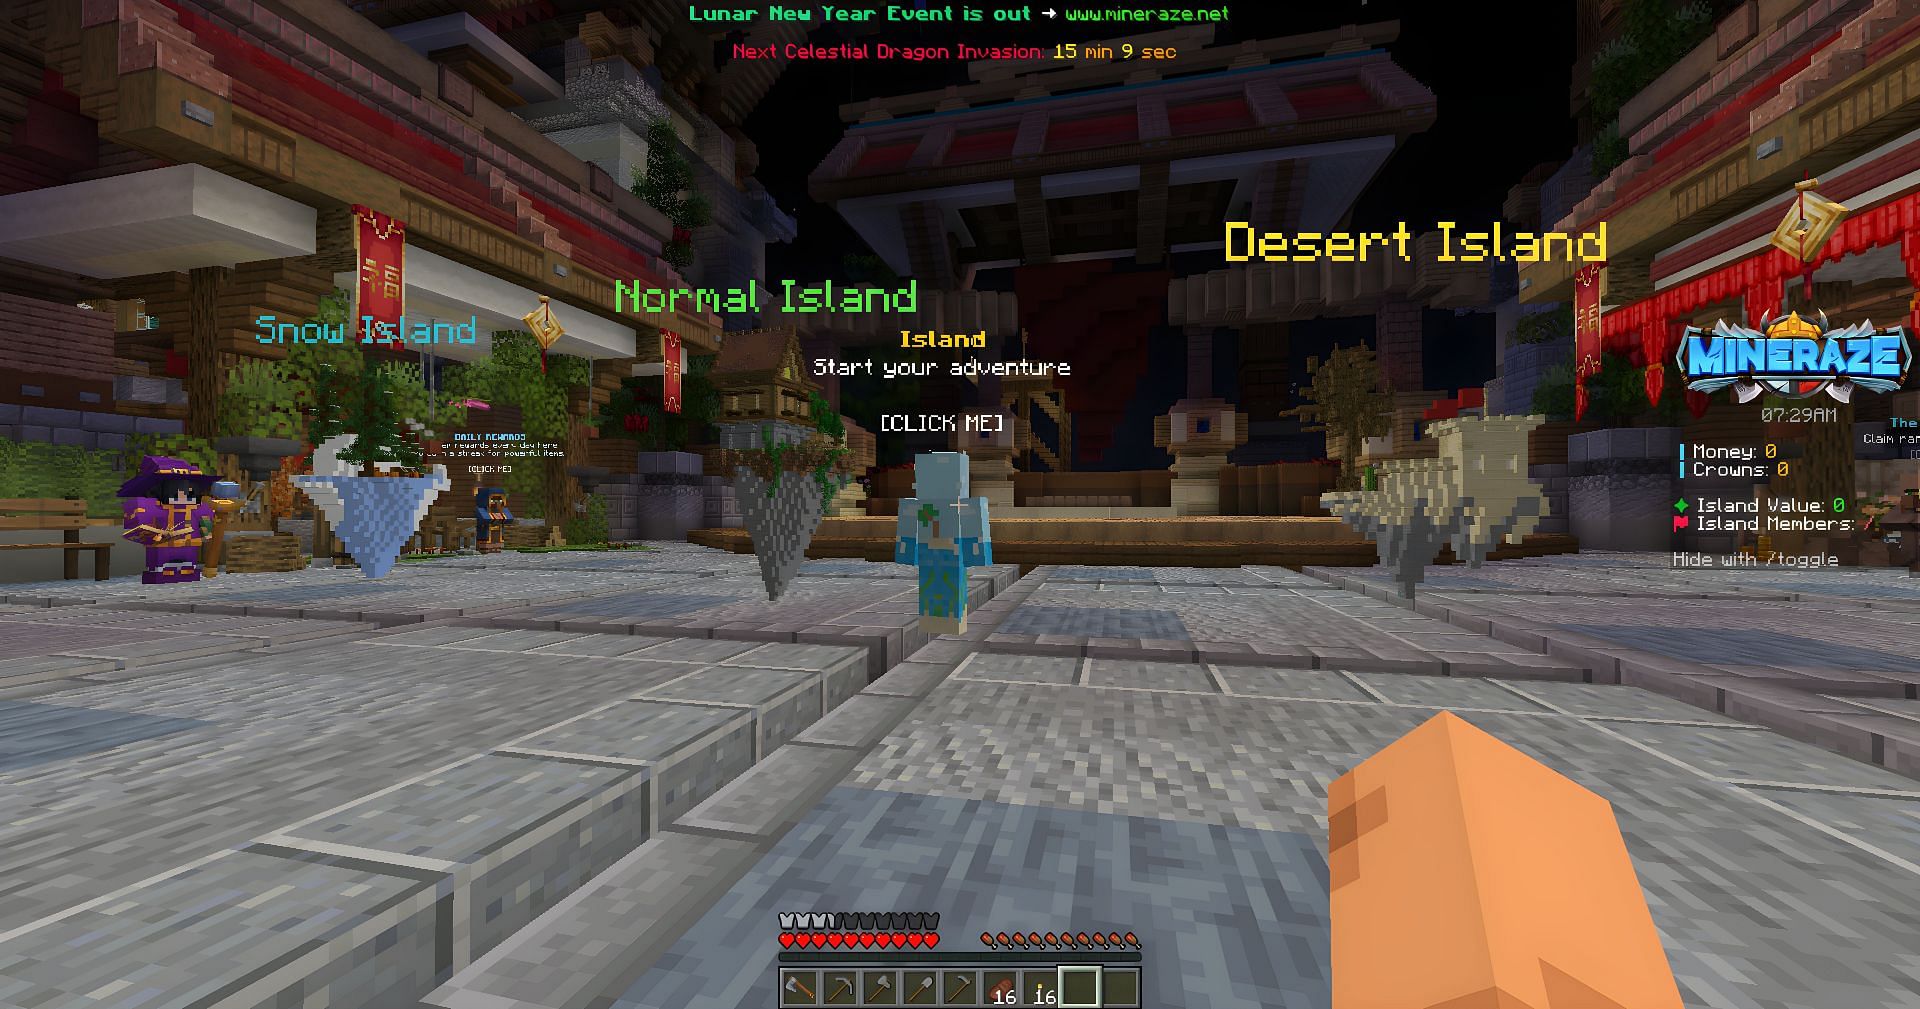 MineRaze is an insane server that offers McMMO (Image via Mojang)